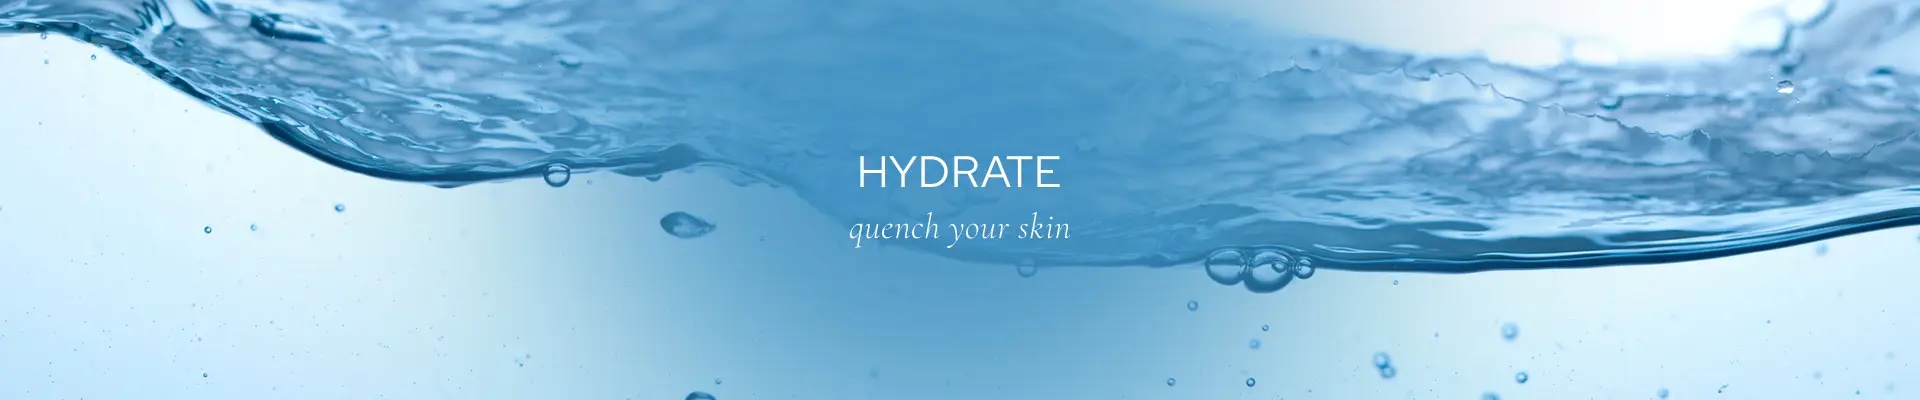 Hydrate - quench your skin